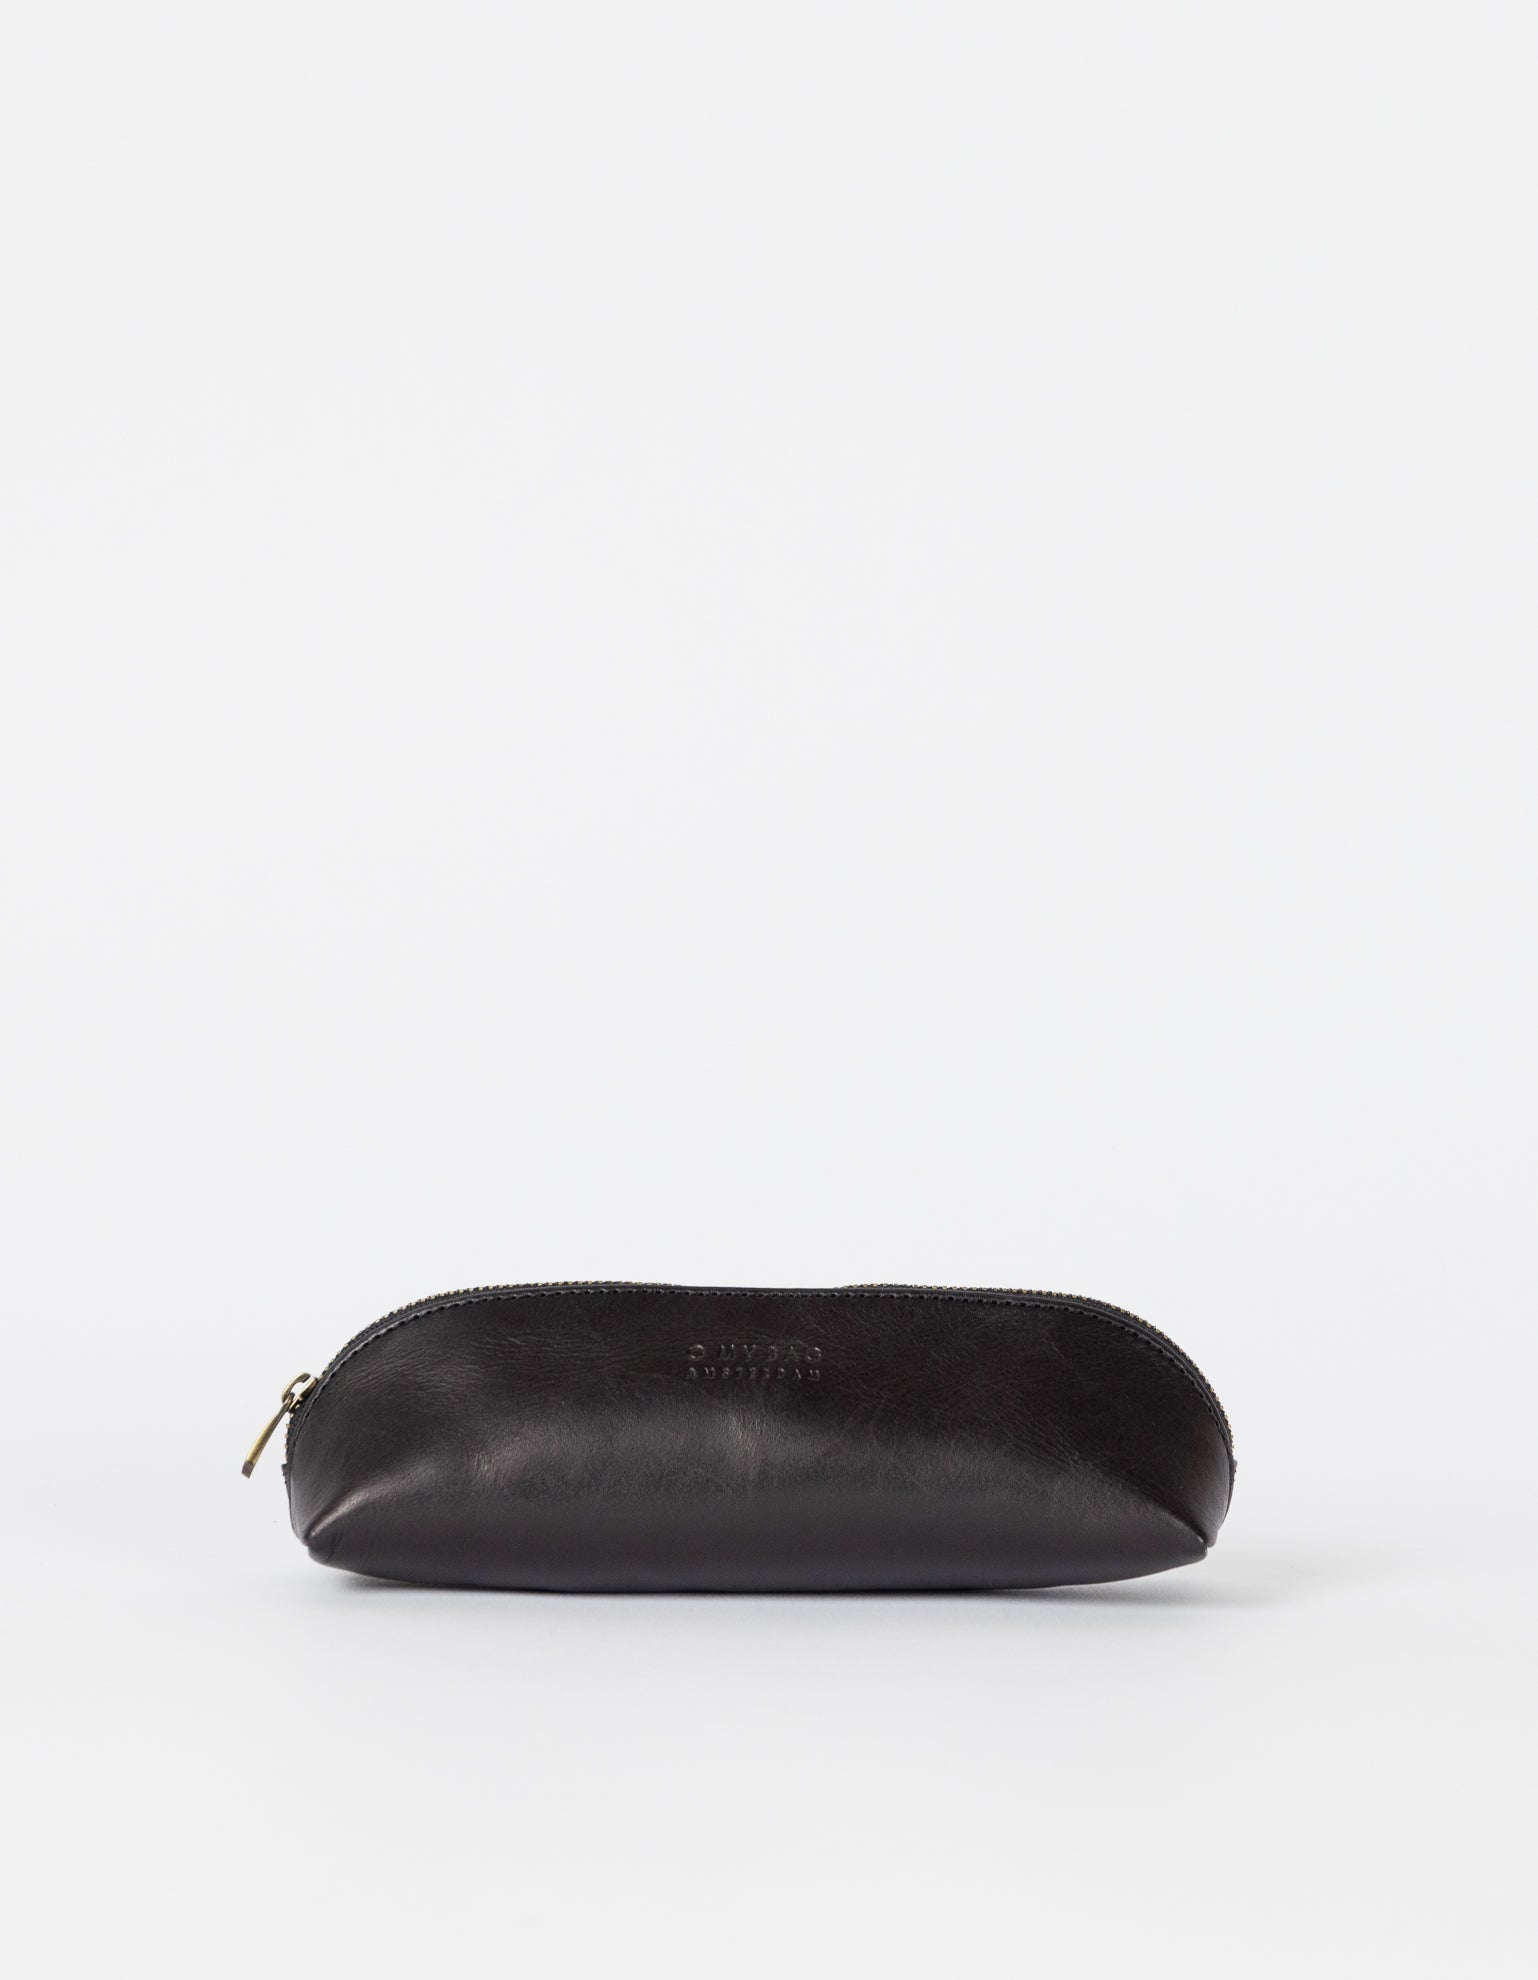 Products Pencil Case Small - Black Classic Leather - front product image